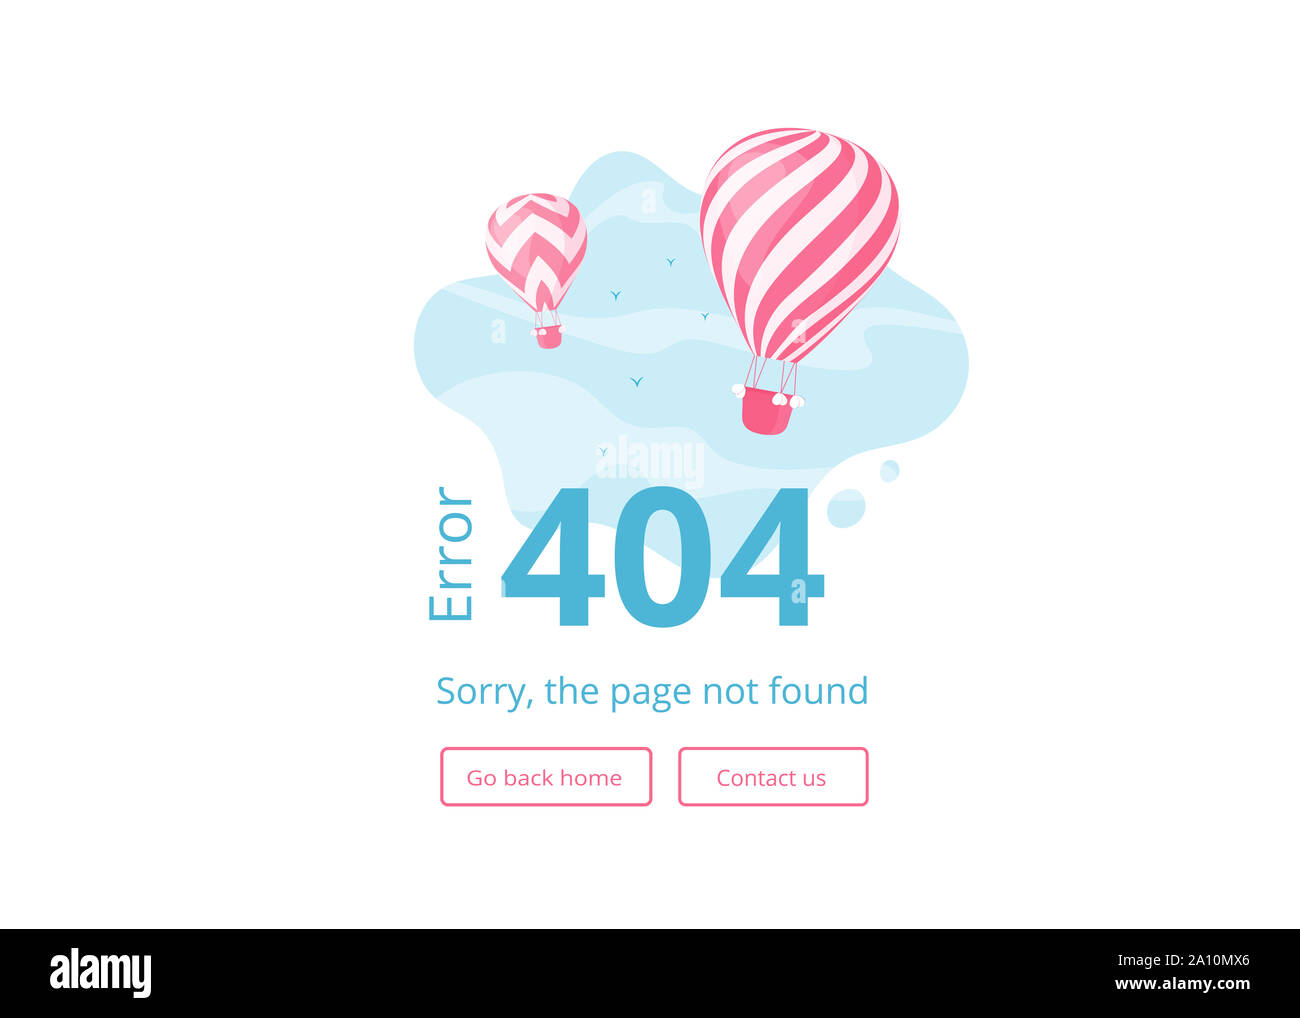 Page not found 404 error website illustration. Red stripes hot air balloons  on blue skyscape with